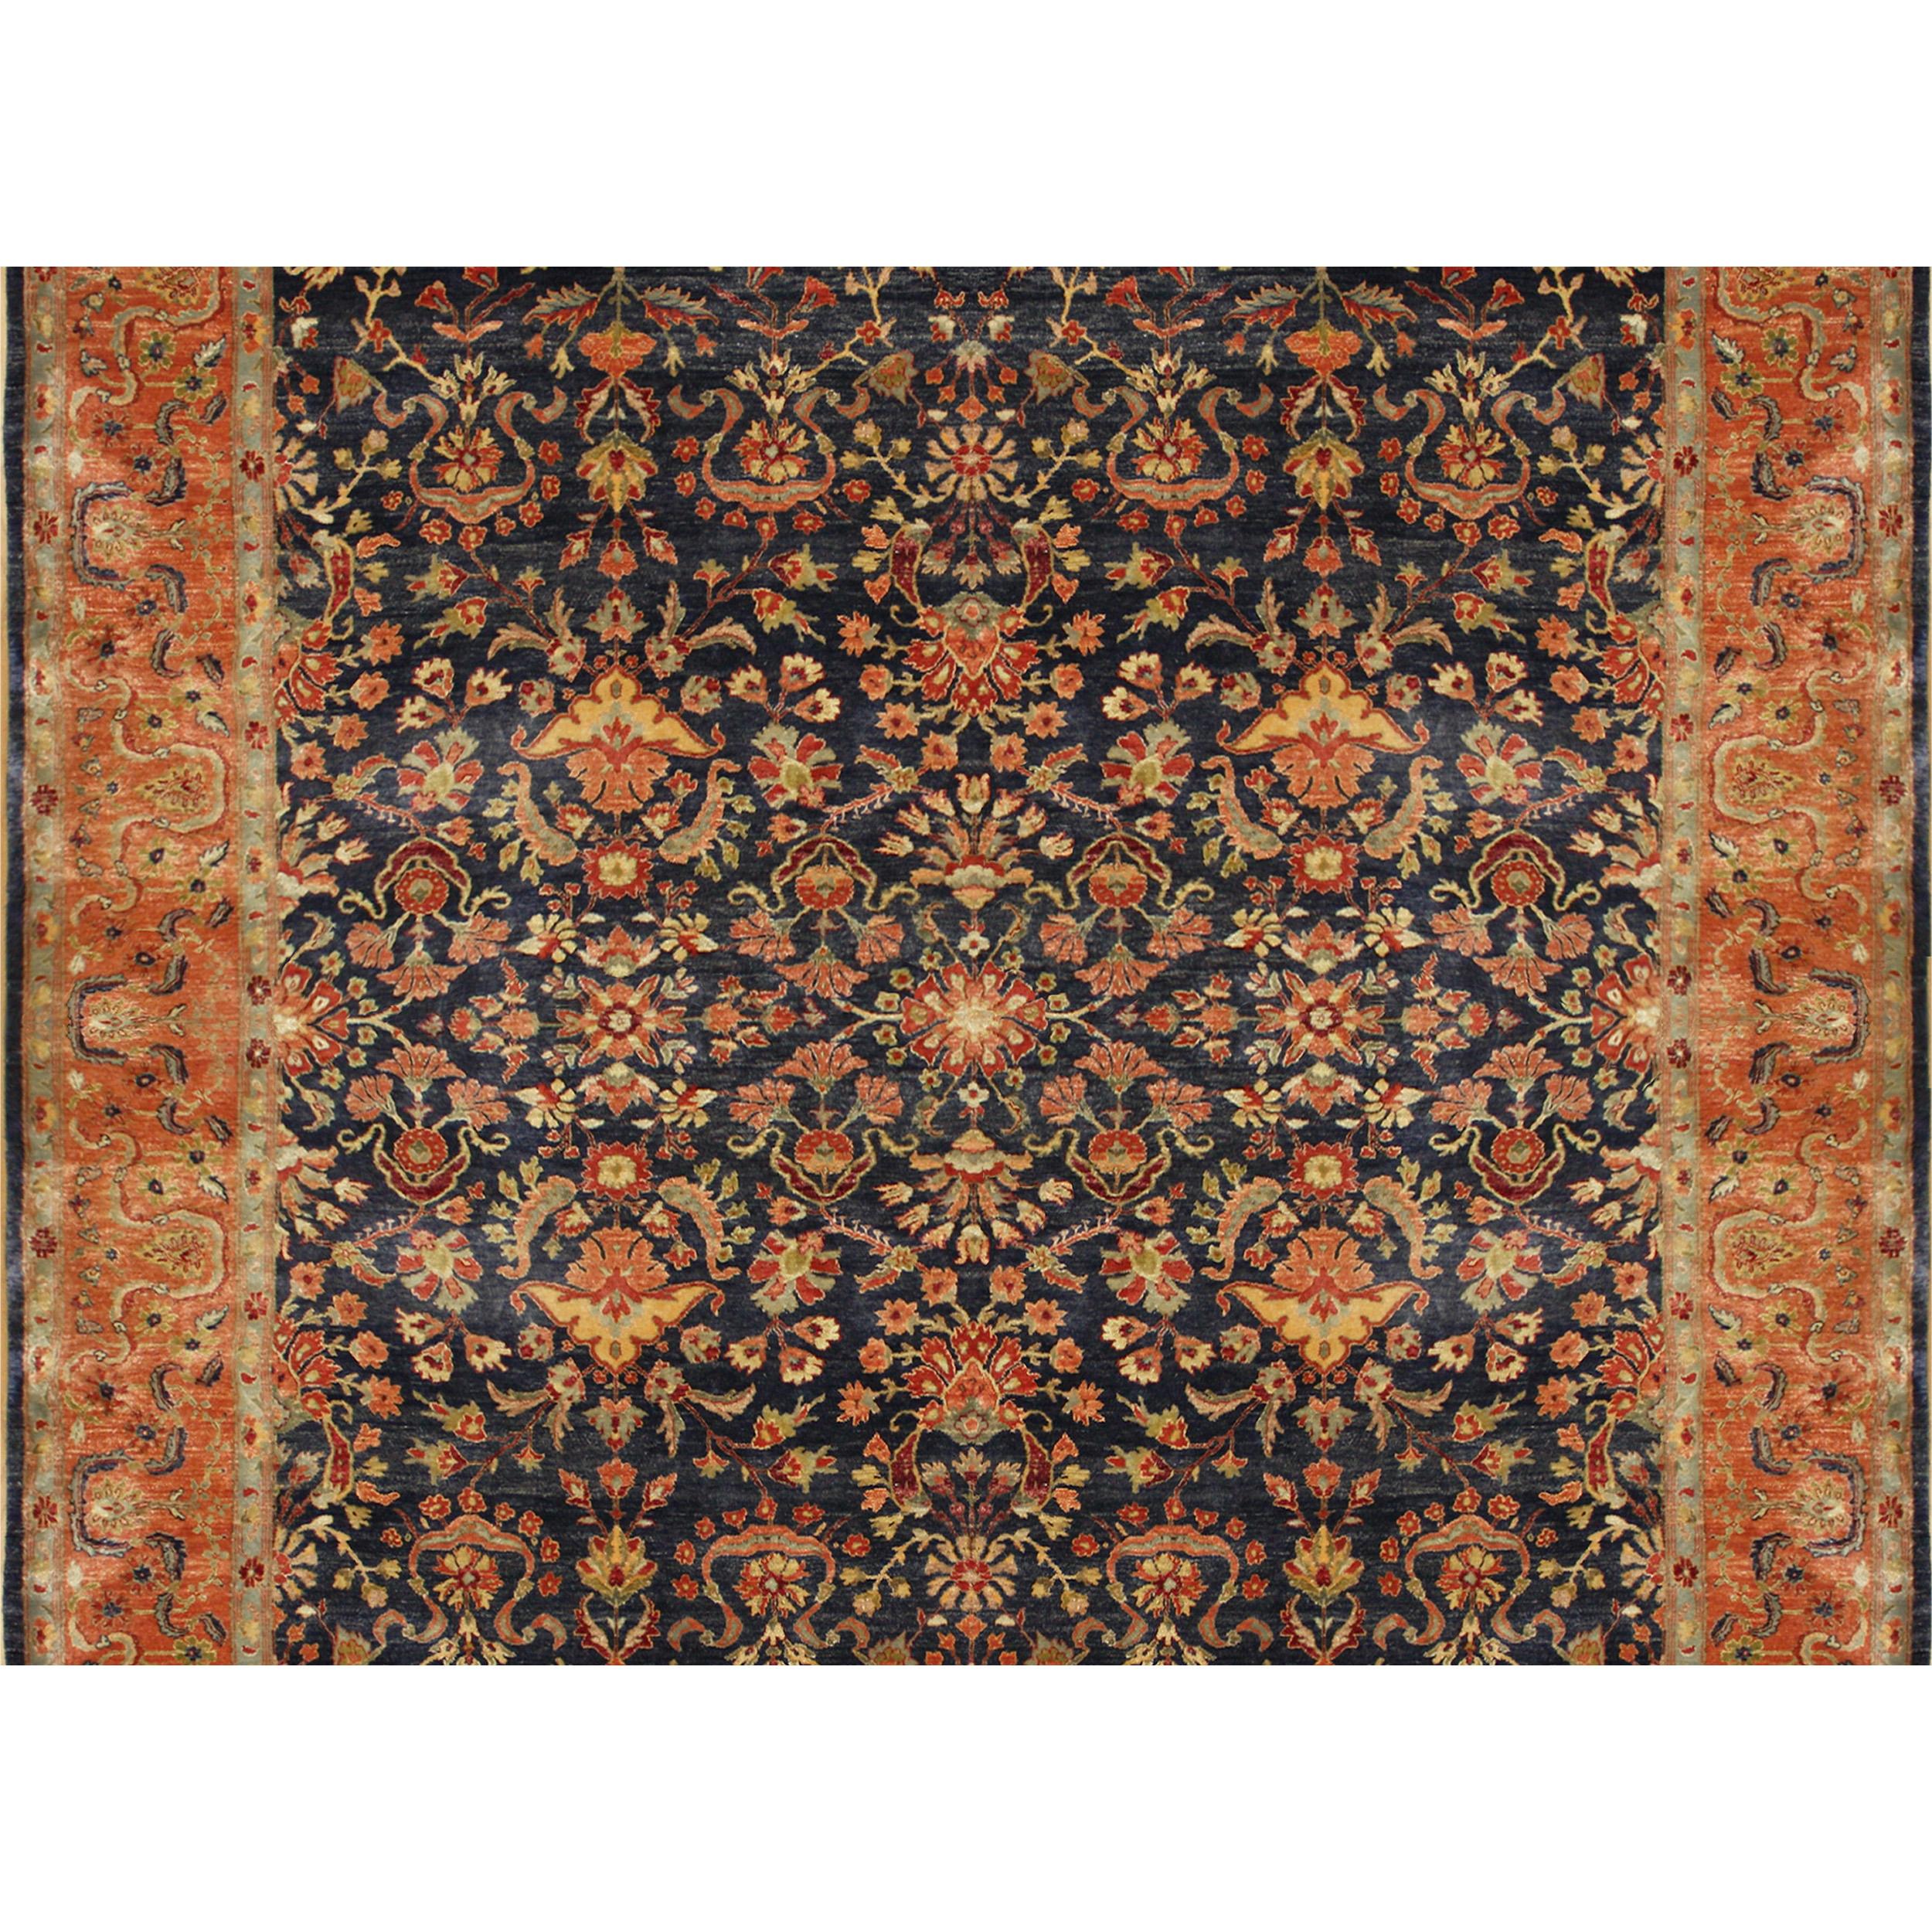 Luxury Traditional Hand-Knotted Bengal Sarouk Navy/Salmon 12x15 Rug In New Condition For Sale In Secaucus, NJ